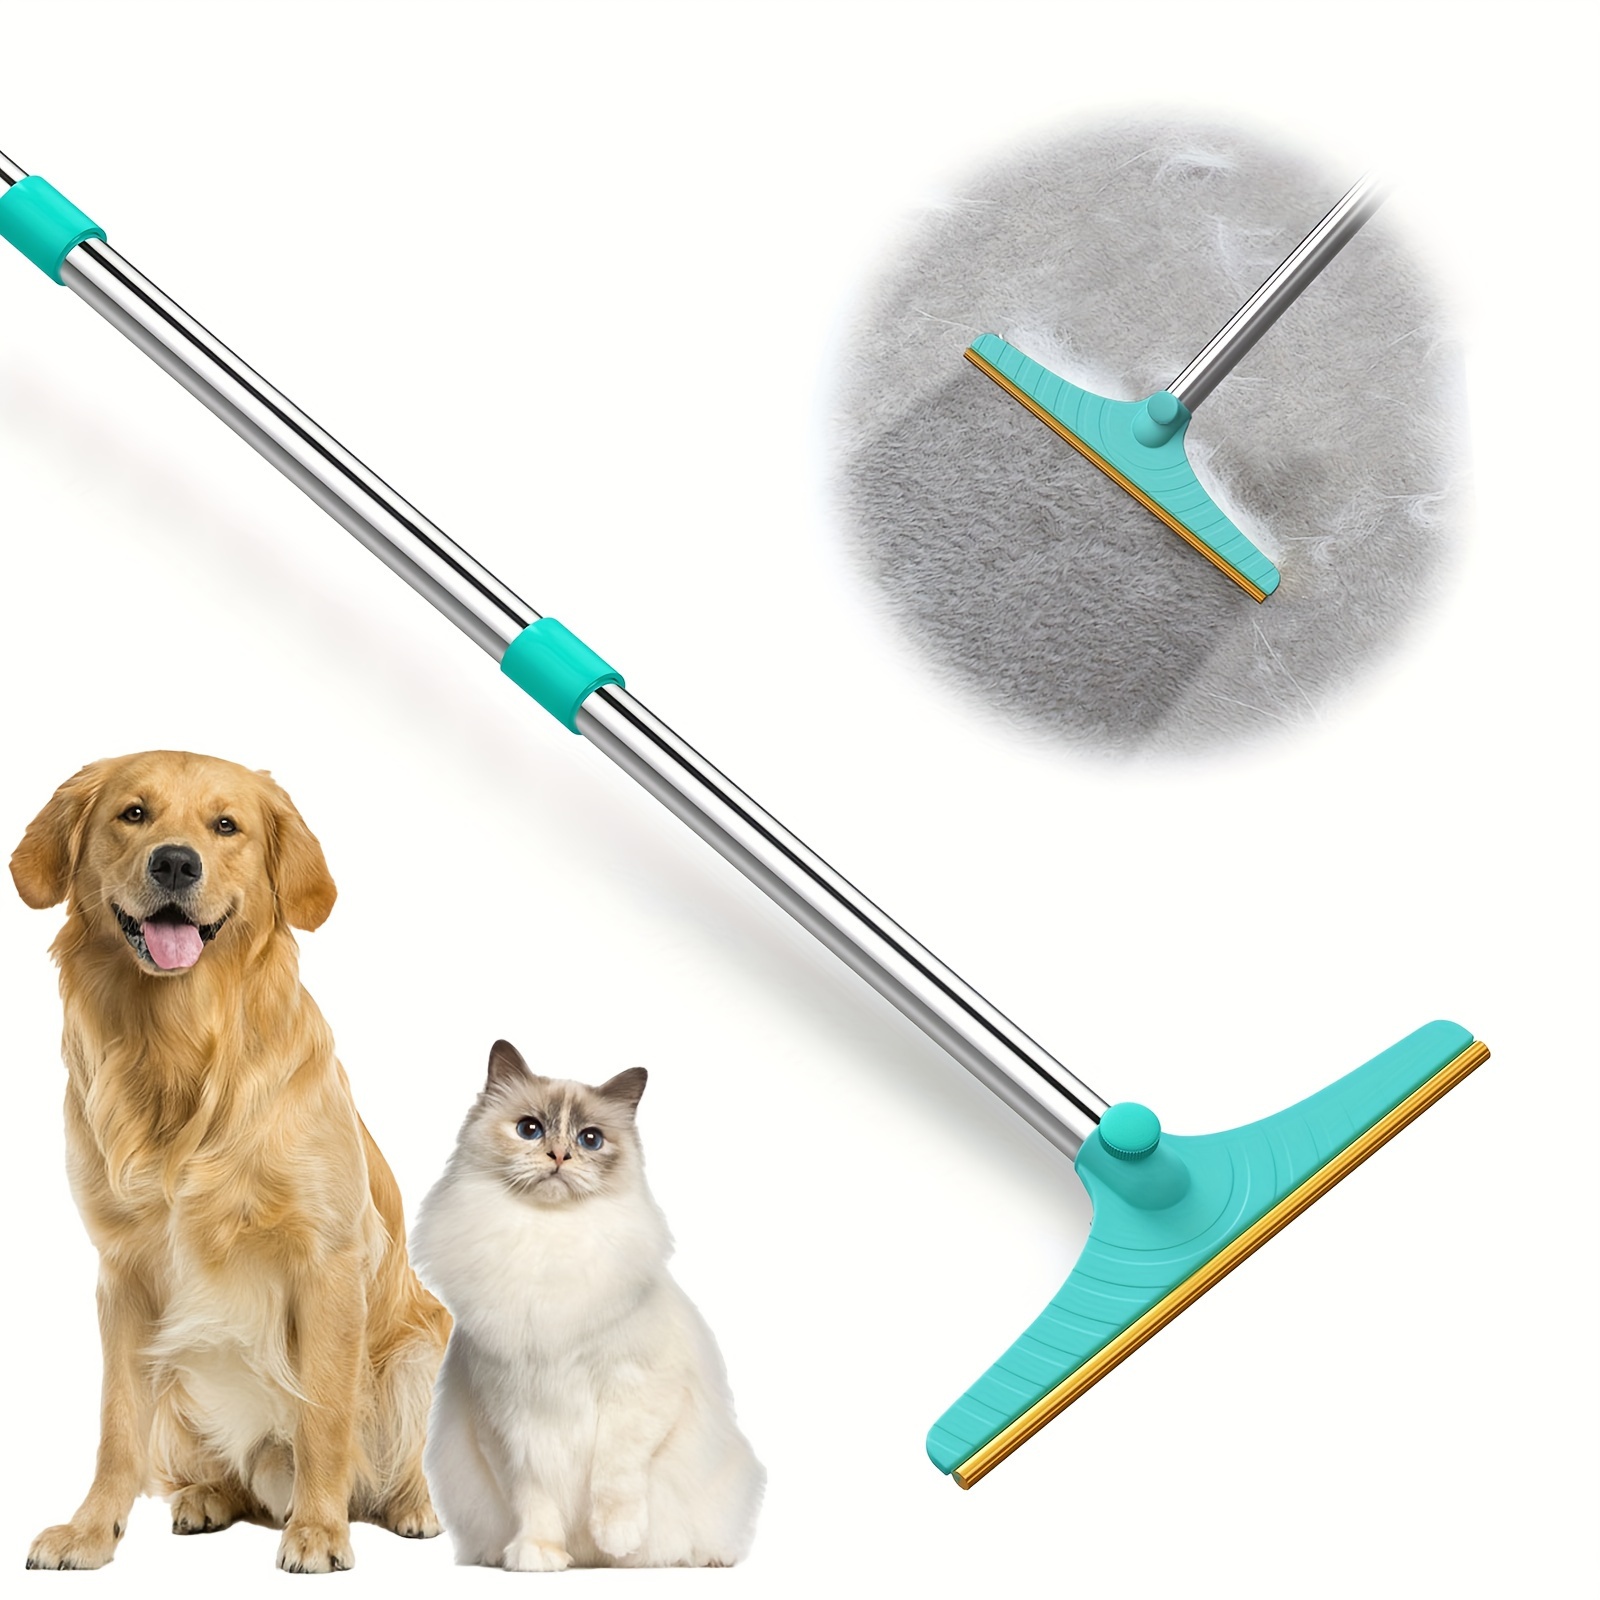 Pet Hair Cleaning Products That Actually Work